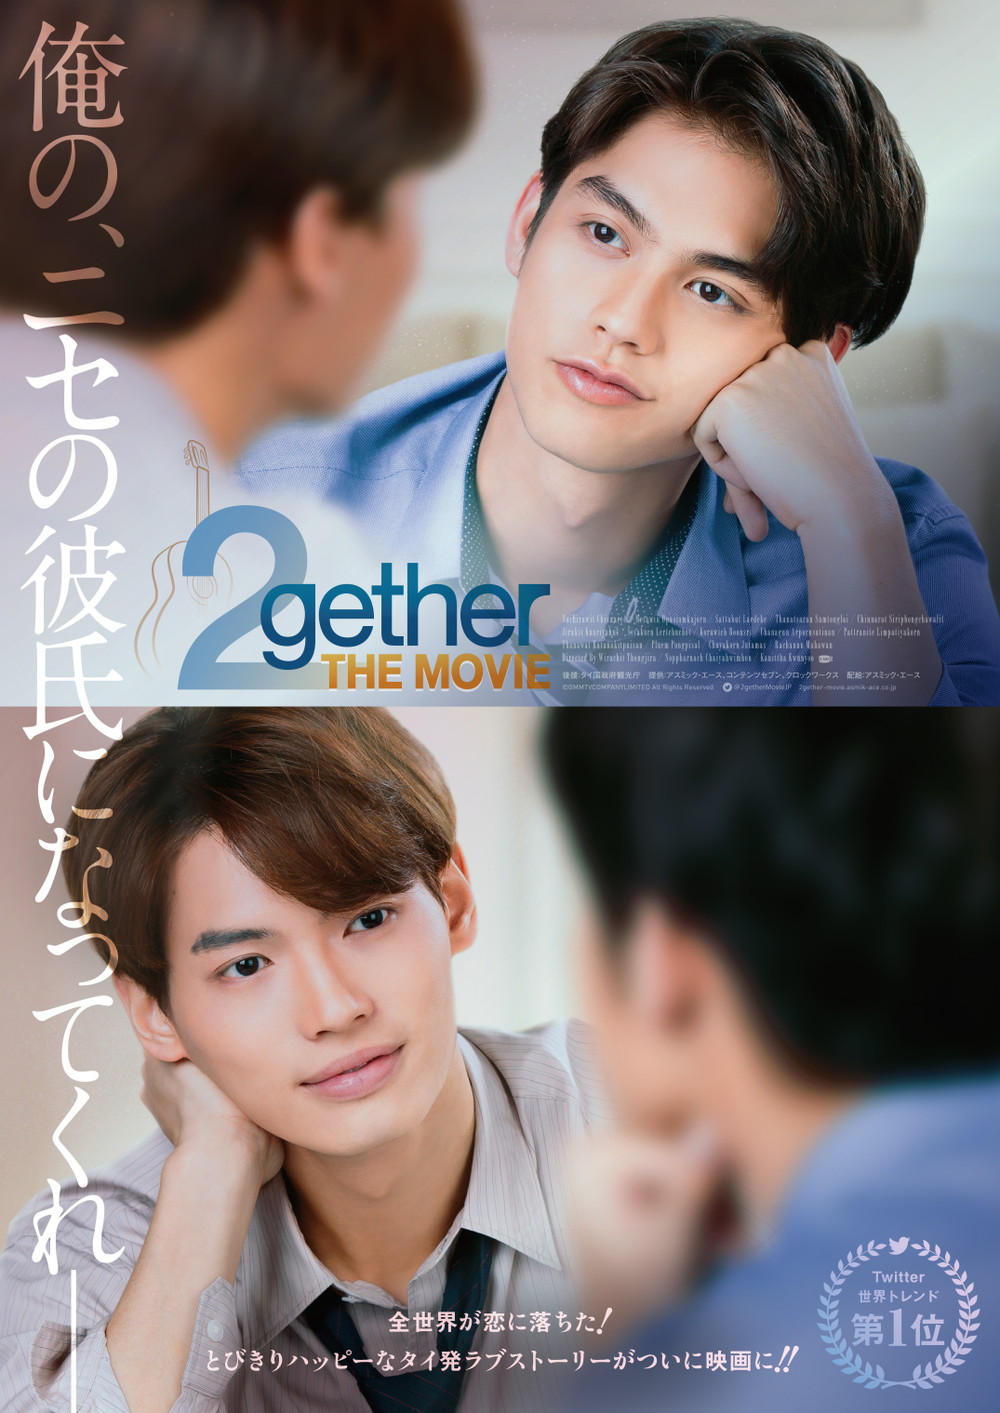 『2gether-THE-MOVIE』